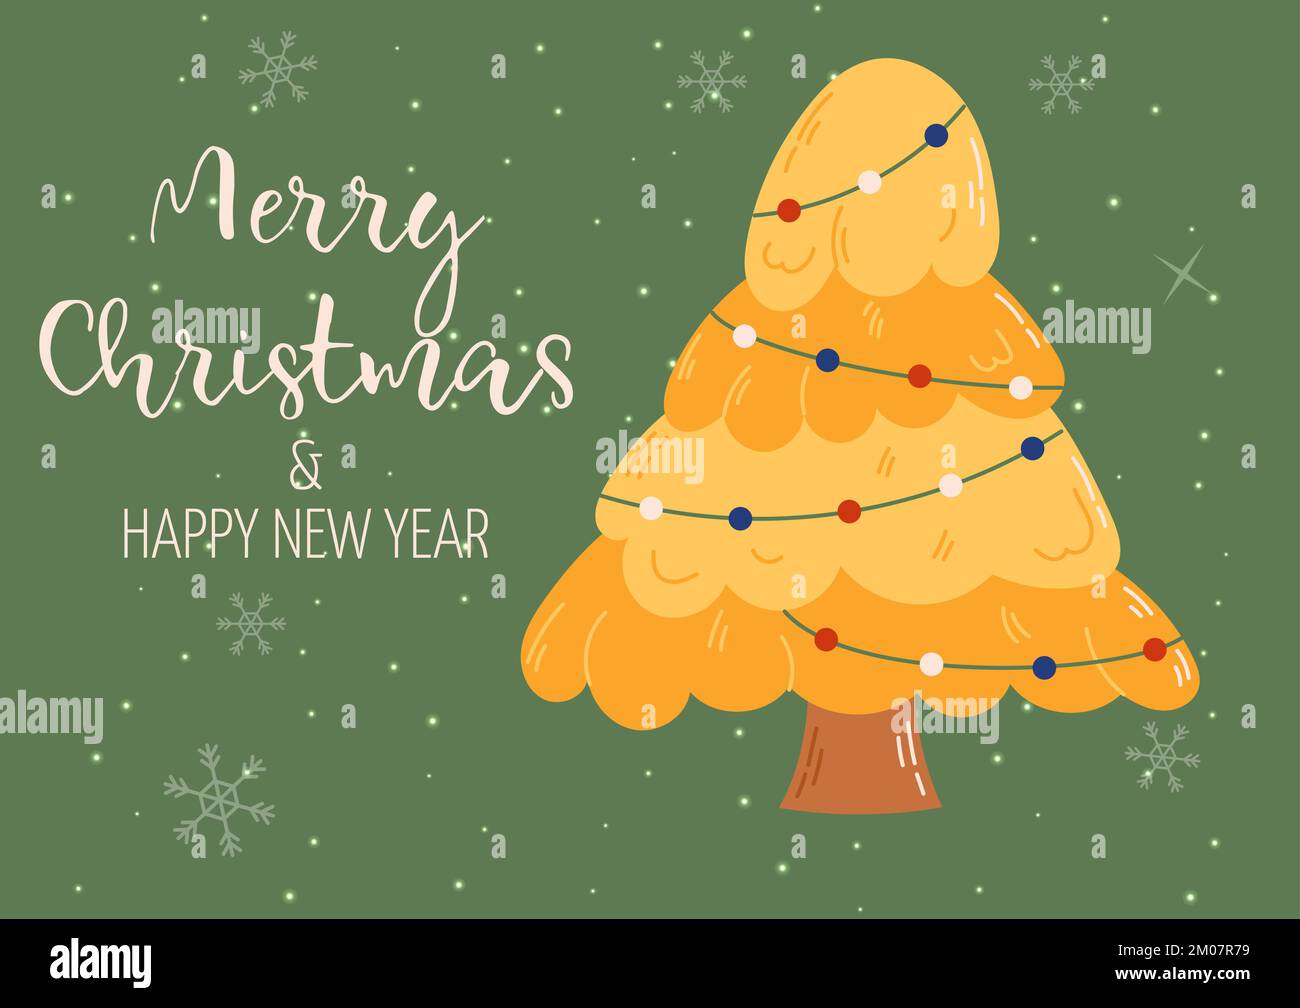 https://c8.alamy.com/comp/2M07R79/groovy-christmas-card-with-christmas-tree-christmas-and-new-year-celebration-concept-good-for-greeting-card-invitation-banner-web-design-2M07R79.jpg